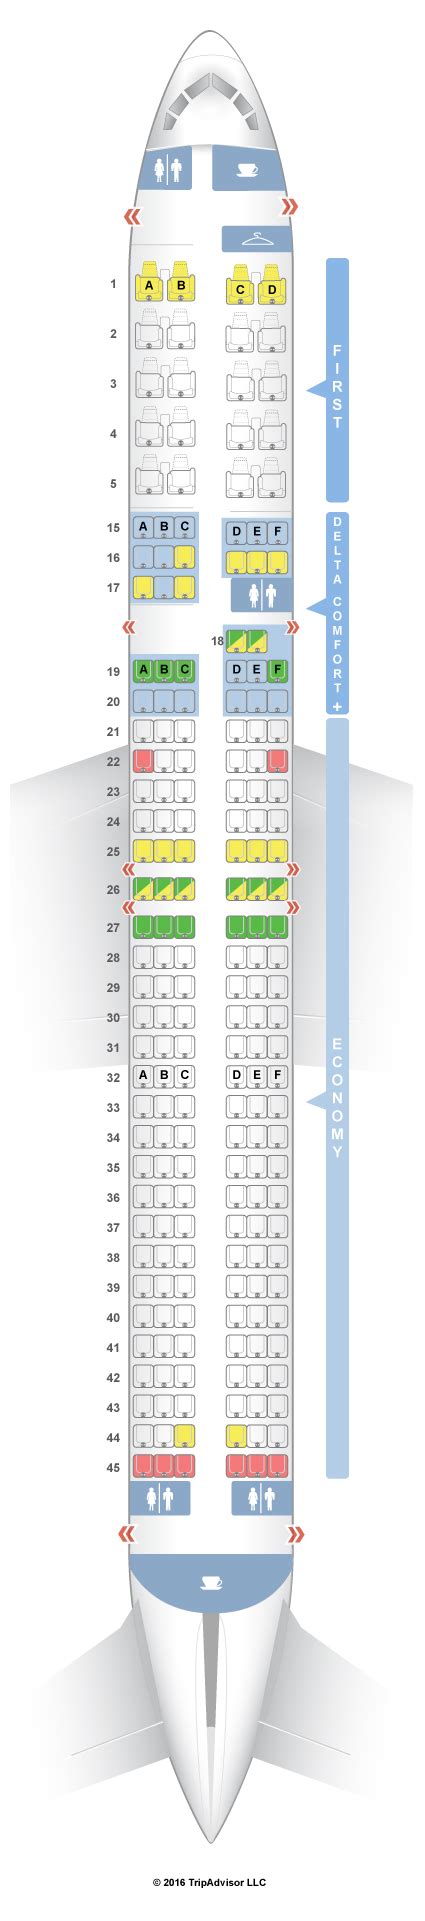 Delta Airlines Boeing 757 Seating Chart Hot Sex Picture